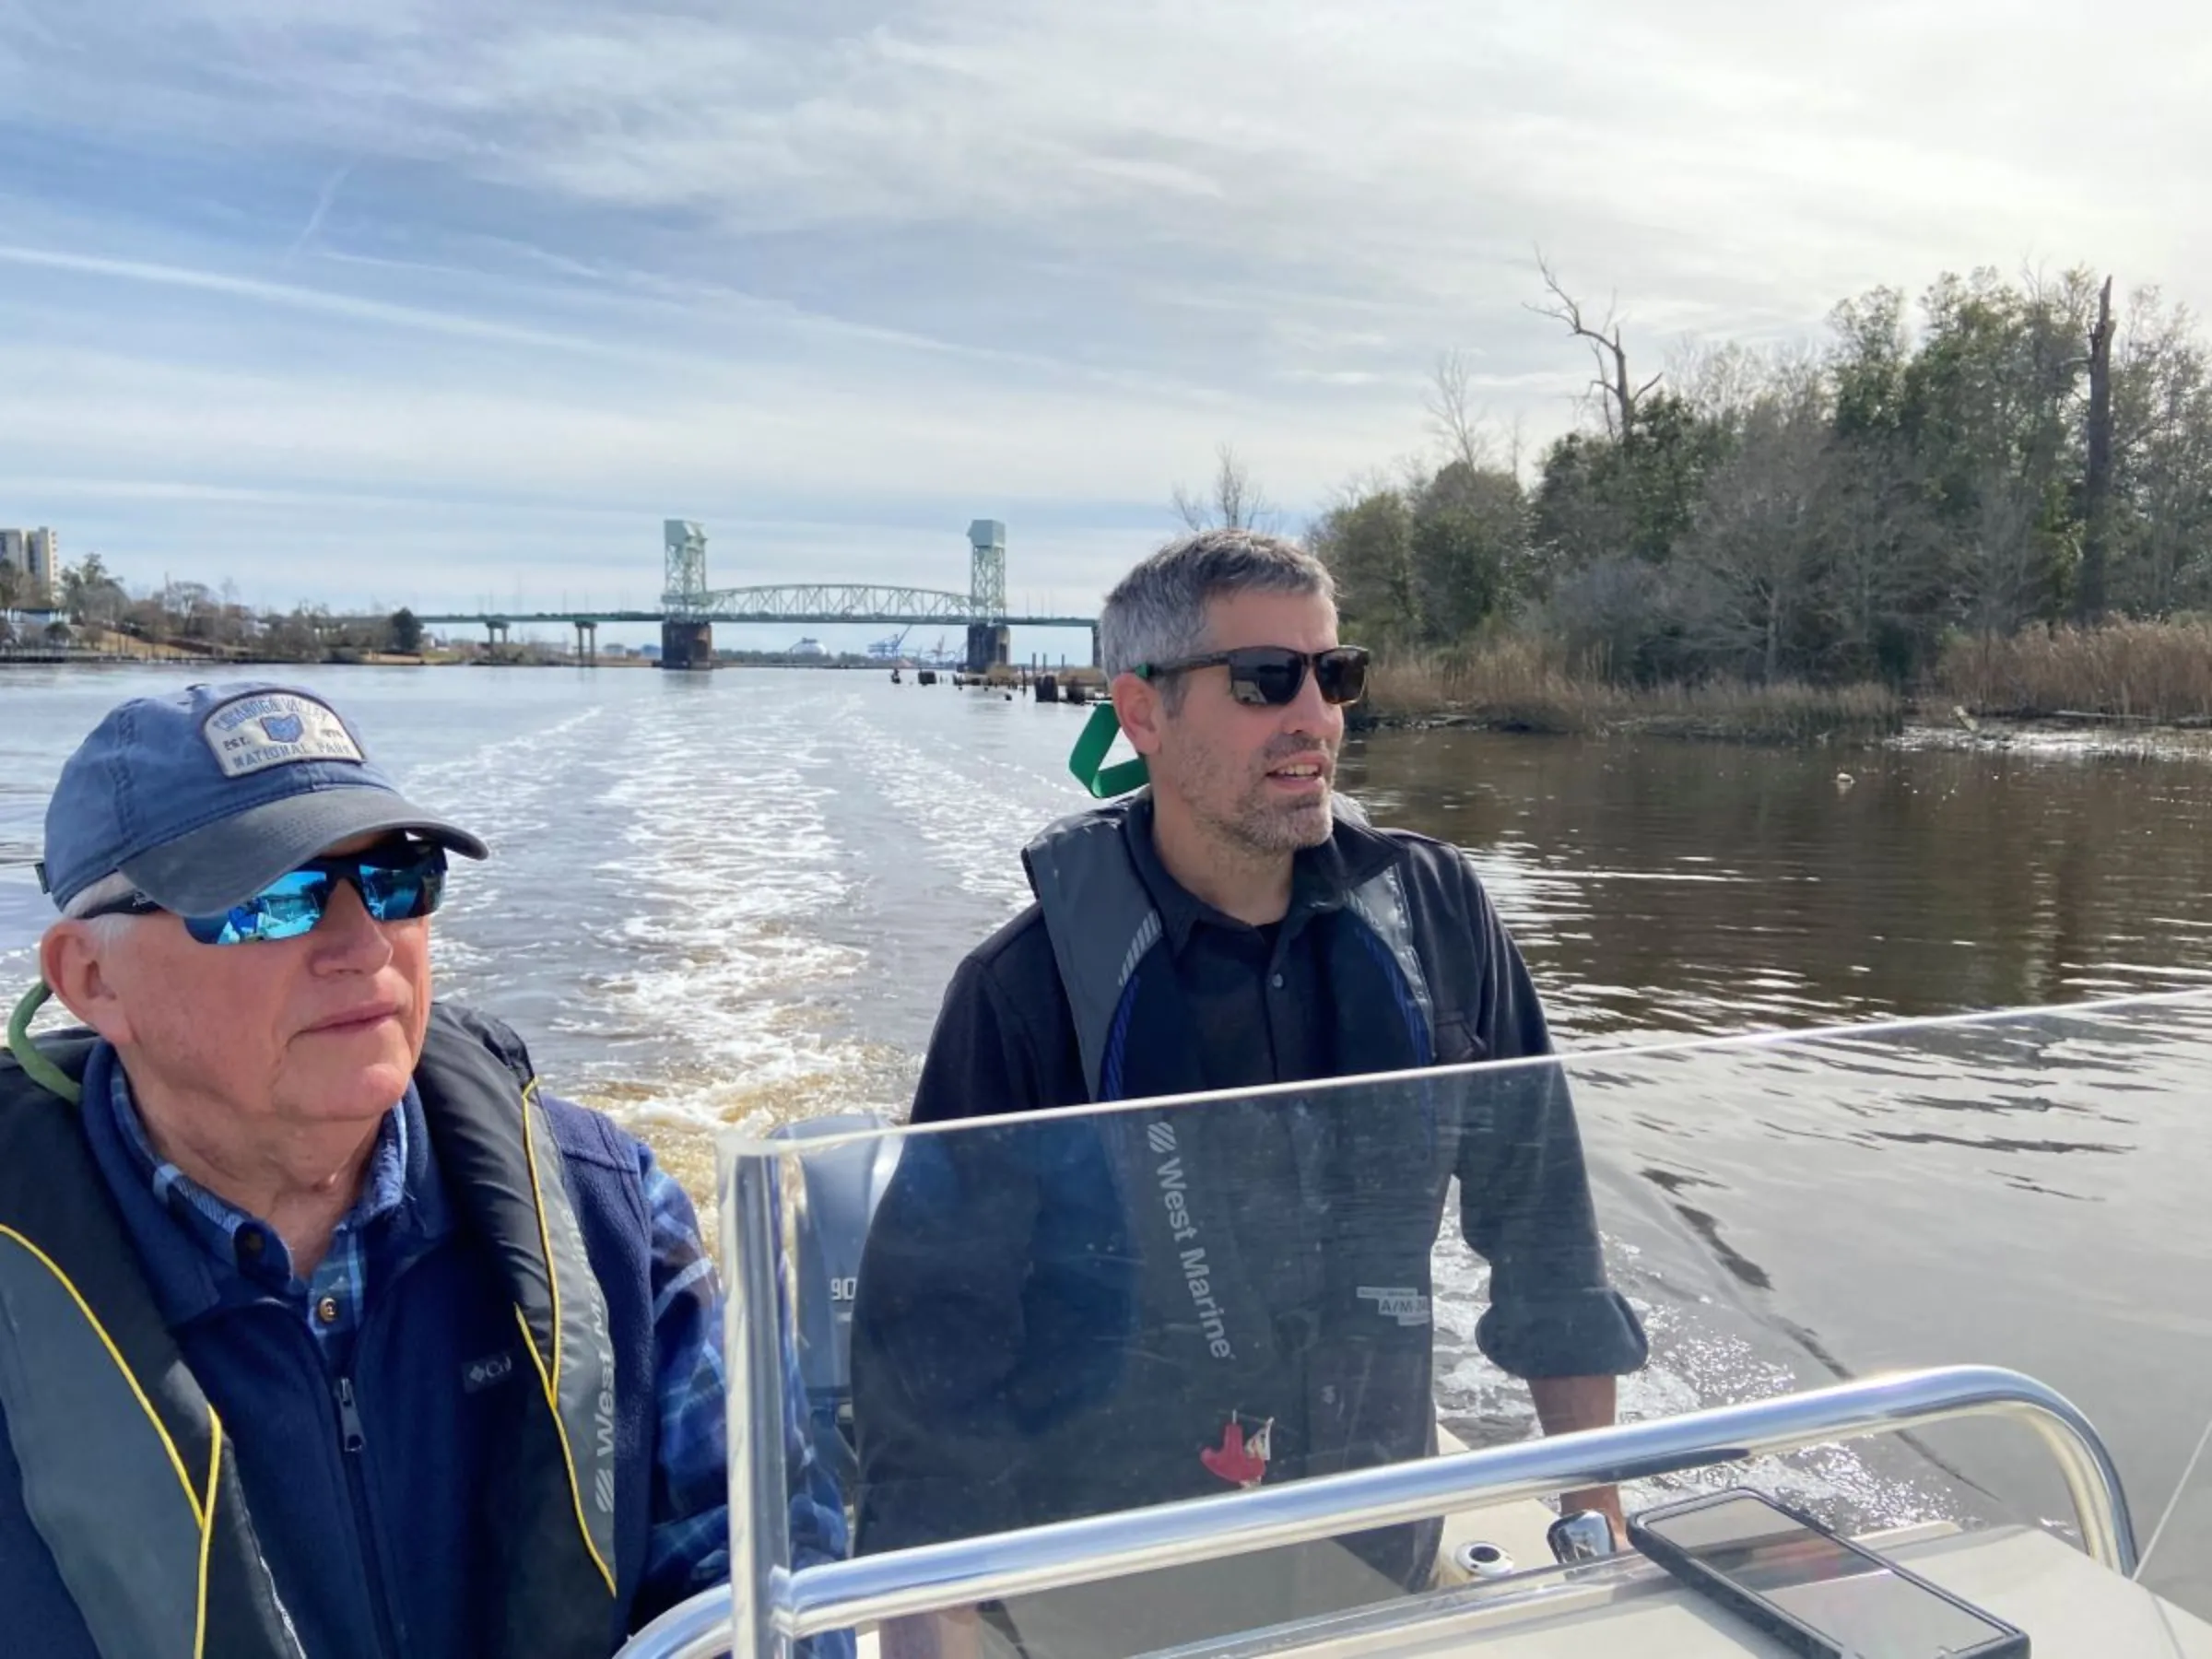 Robert Parr, former oceanographer (left), and Kemp Burdette with Cape Fear River Watch (right) are pictured on the Cape Fear River near downtown Wilmington, North Carolina, USA, February 29, 2024. Thomson Reuters Foundation/David Sherfinski